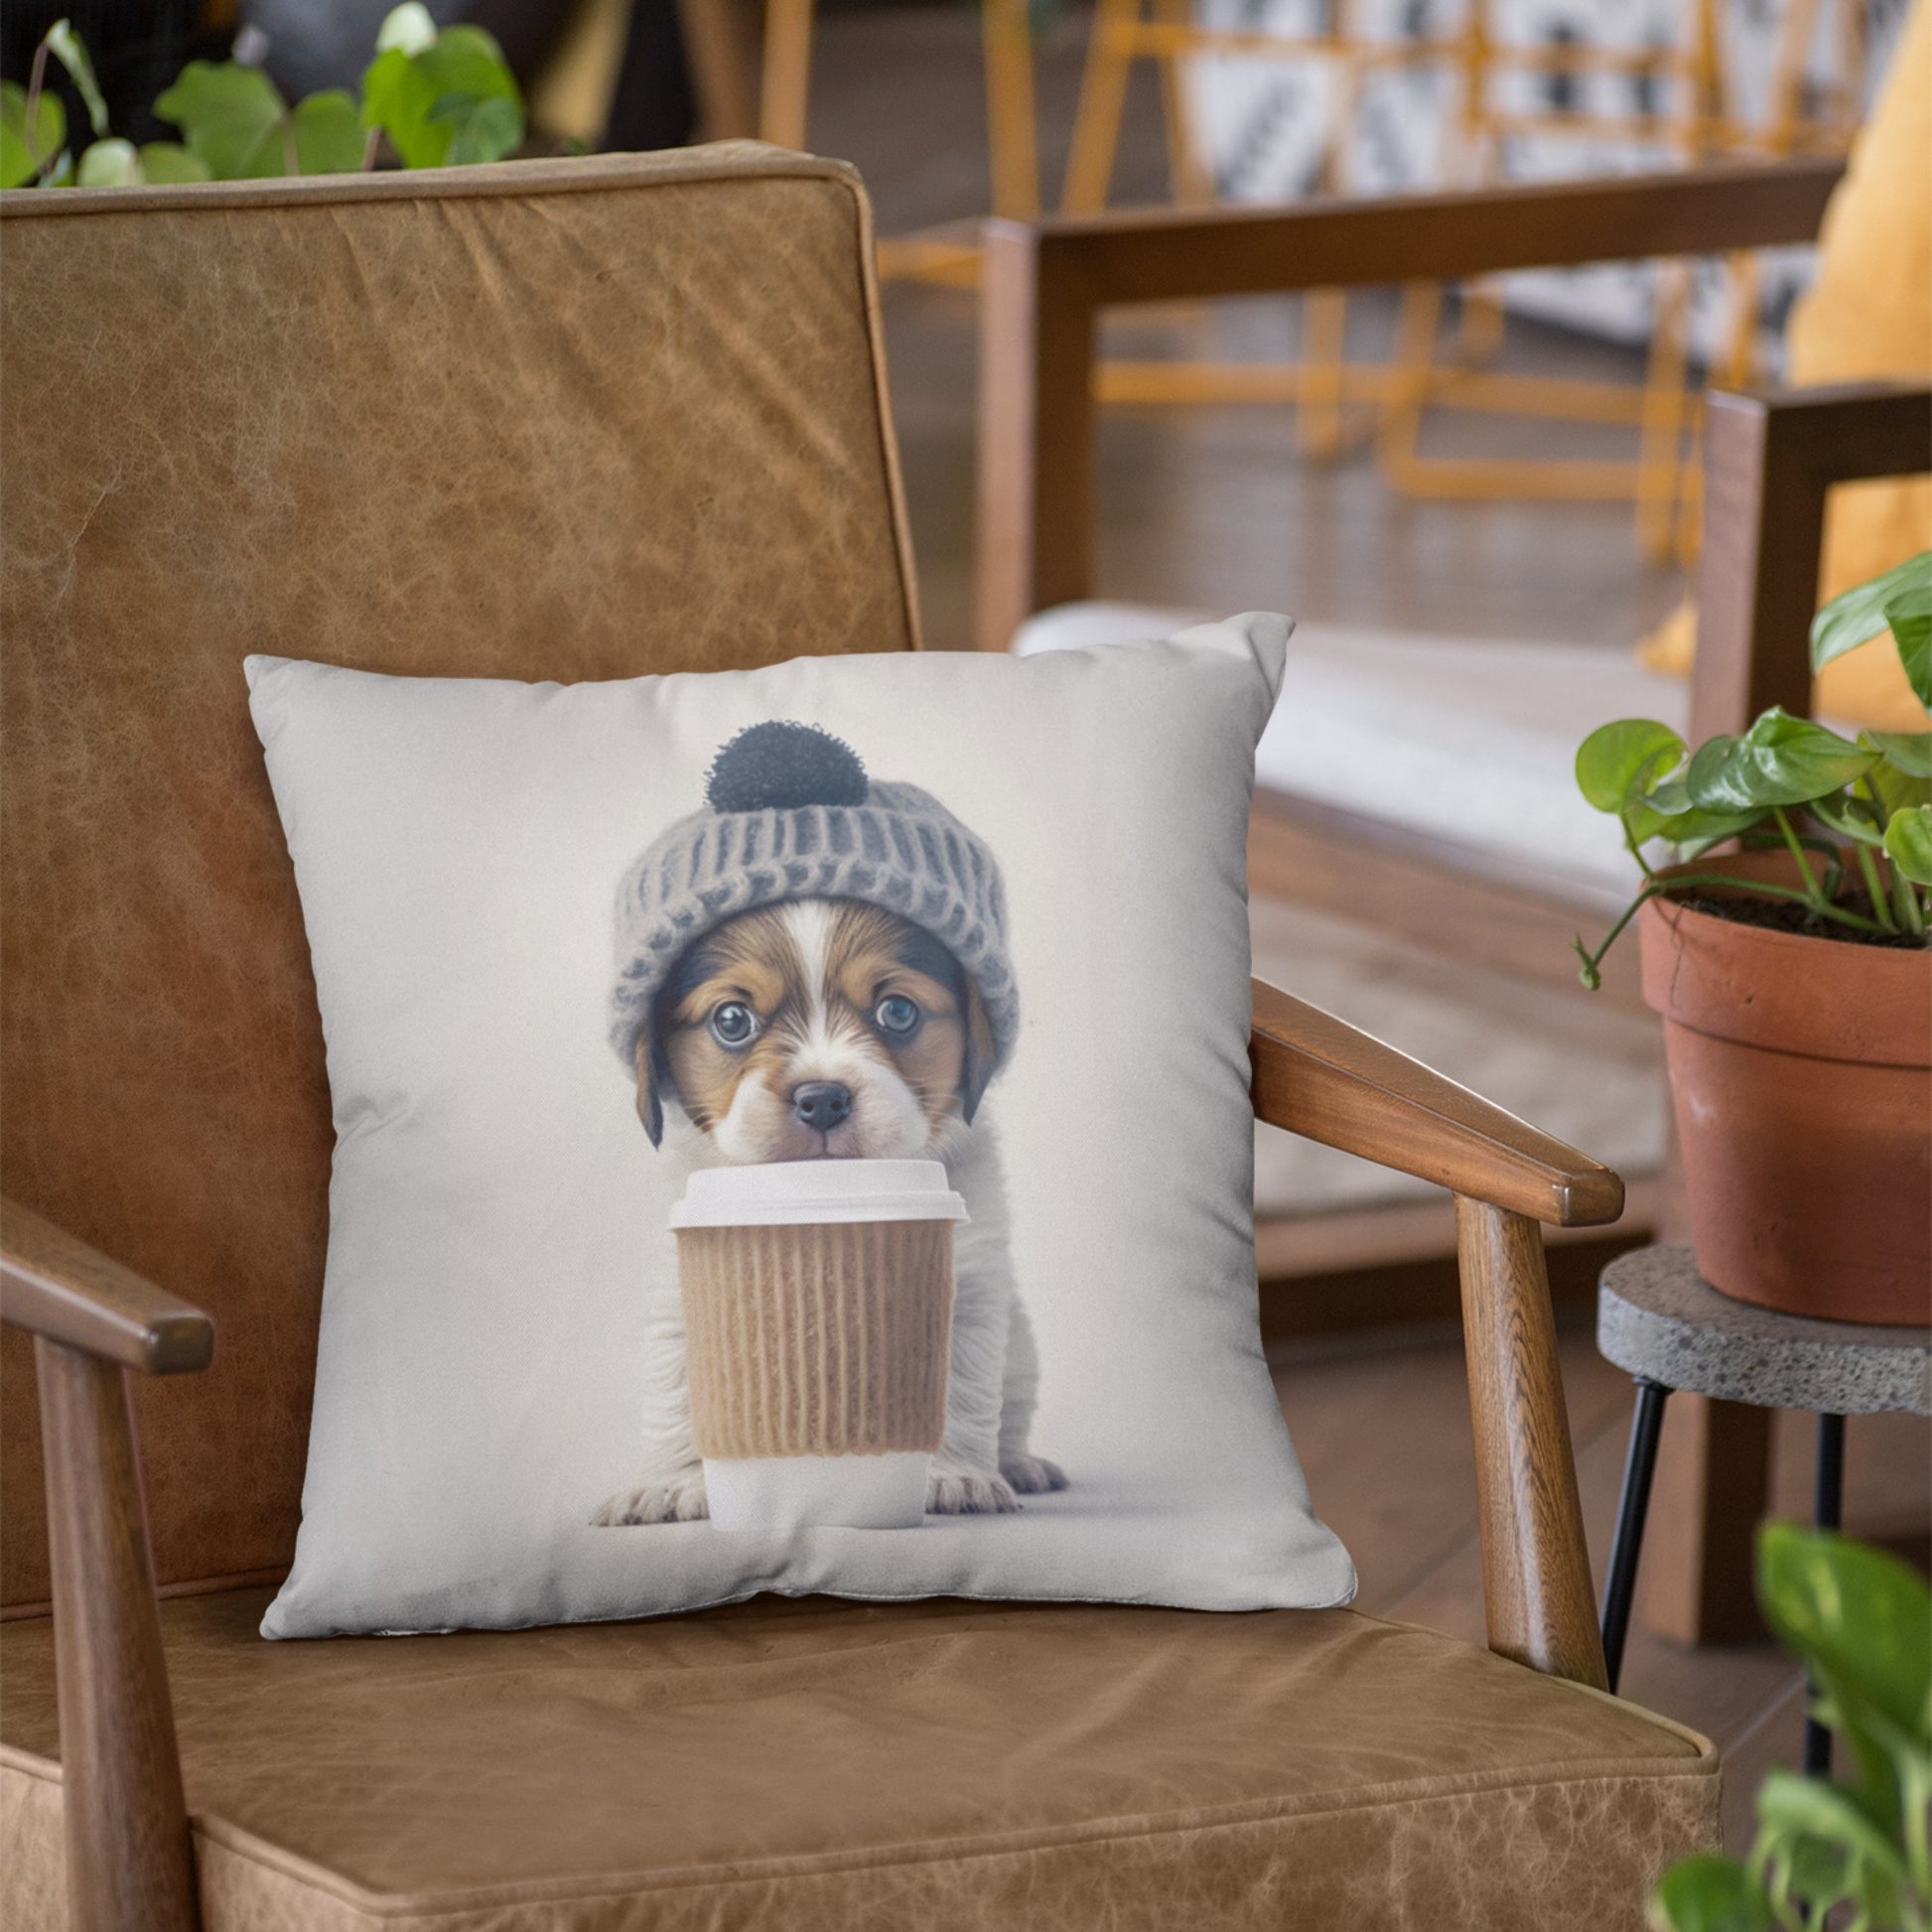 Warmth and Comfort in a Winter-Themed Pillow